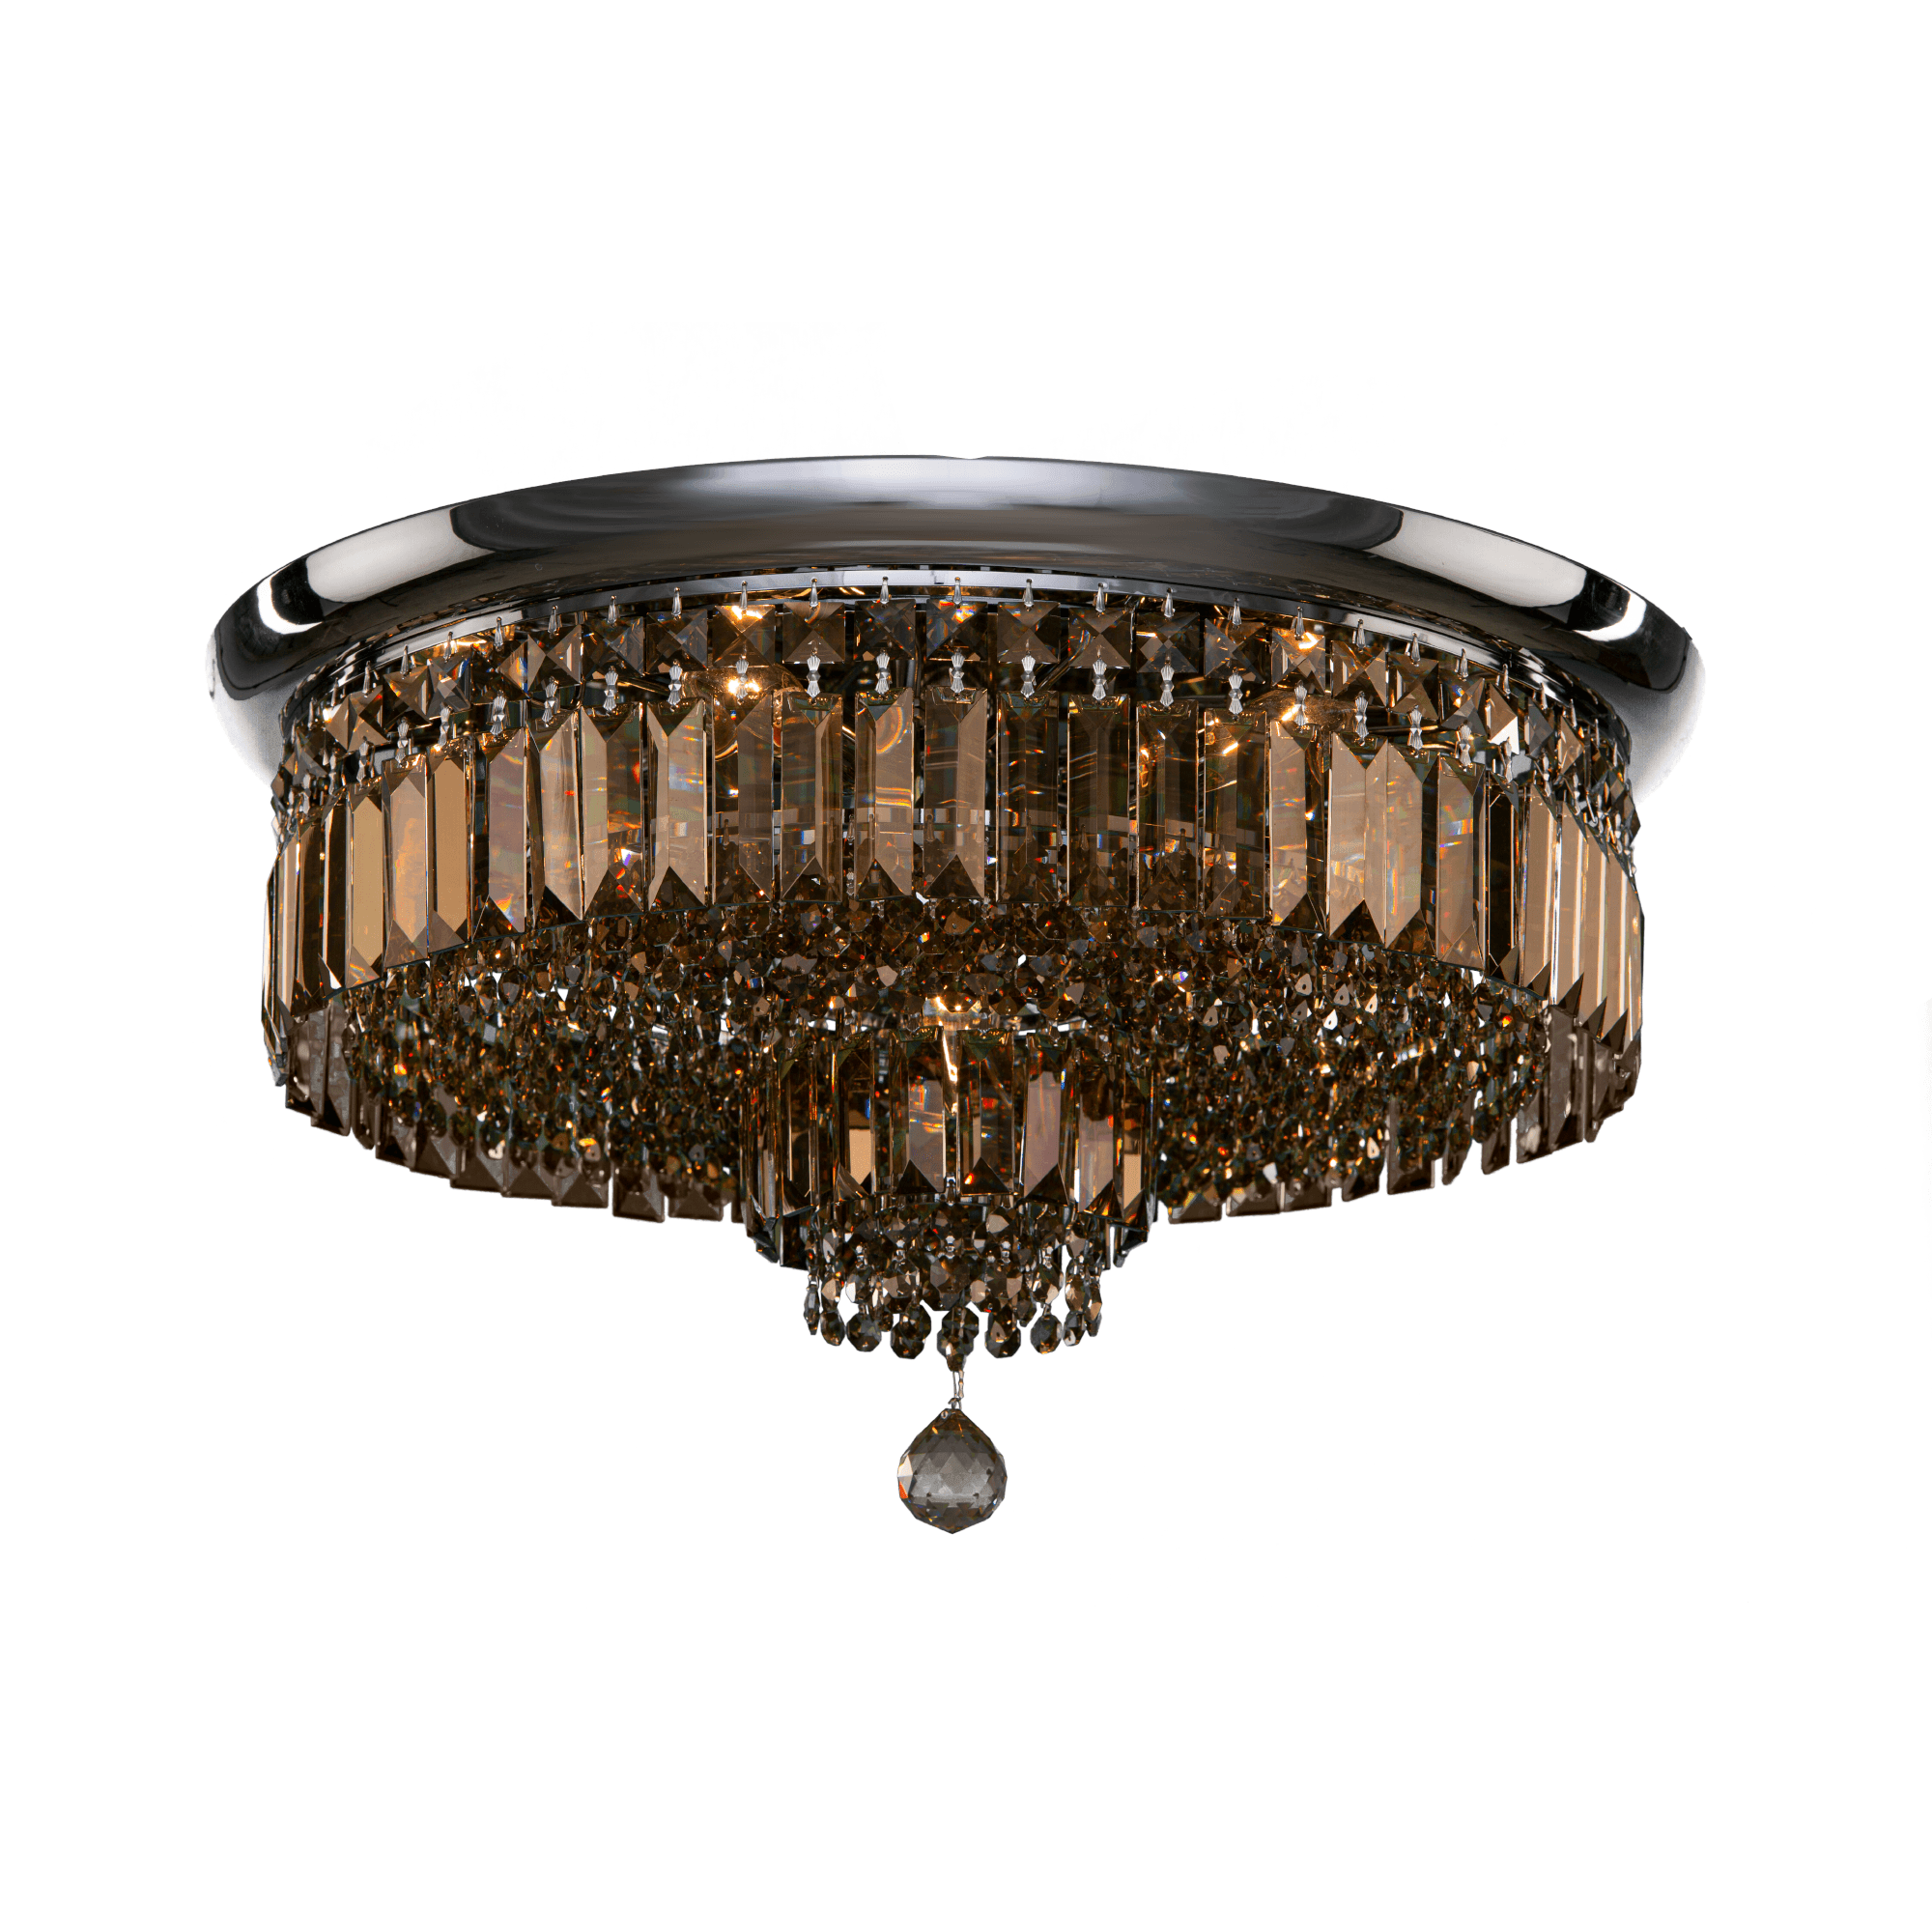 Asfour-Crystal-Lighting-Empire-Collection-Empire-Ceiling-lamp-7-Bulbs-Chrome